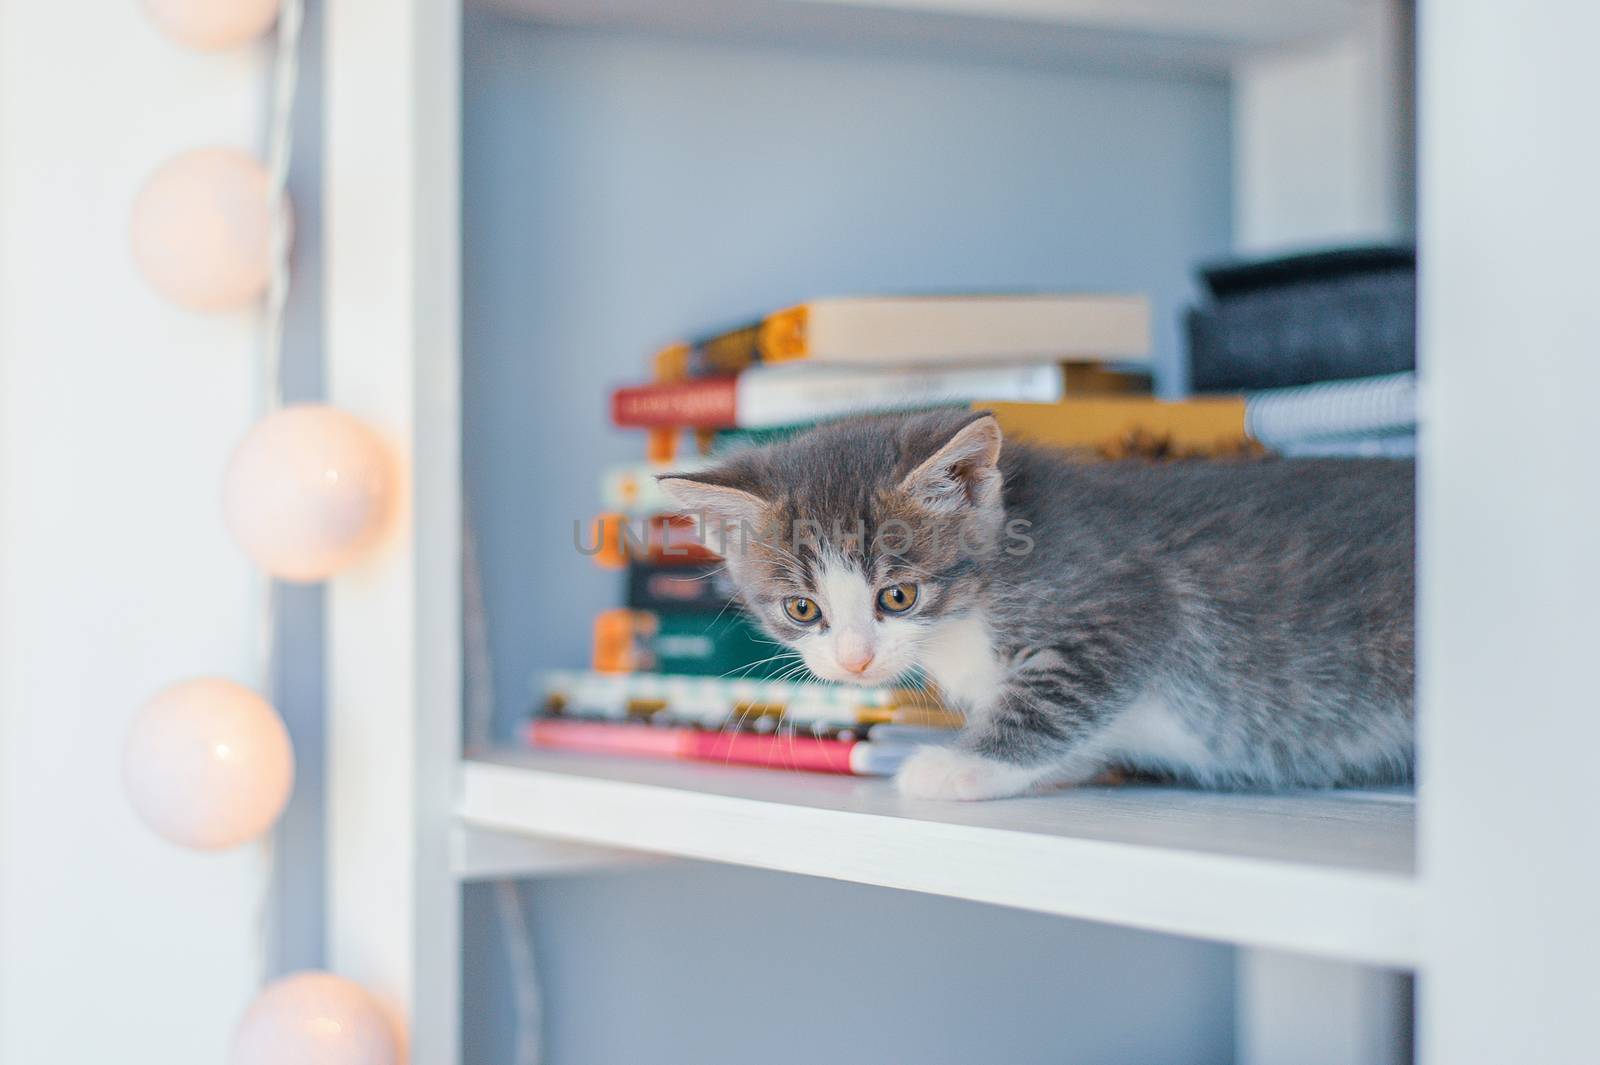 Gray kitten sits on white shelves near books and round lamps.